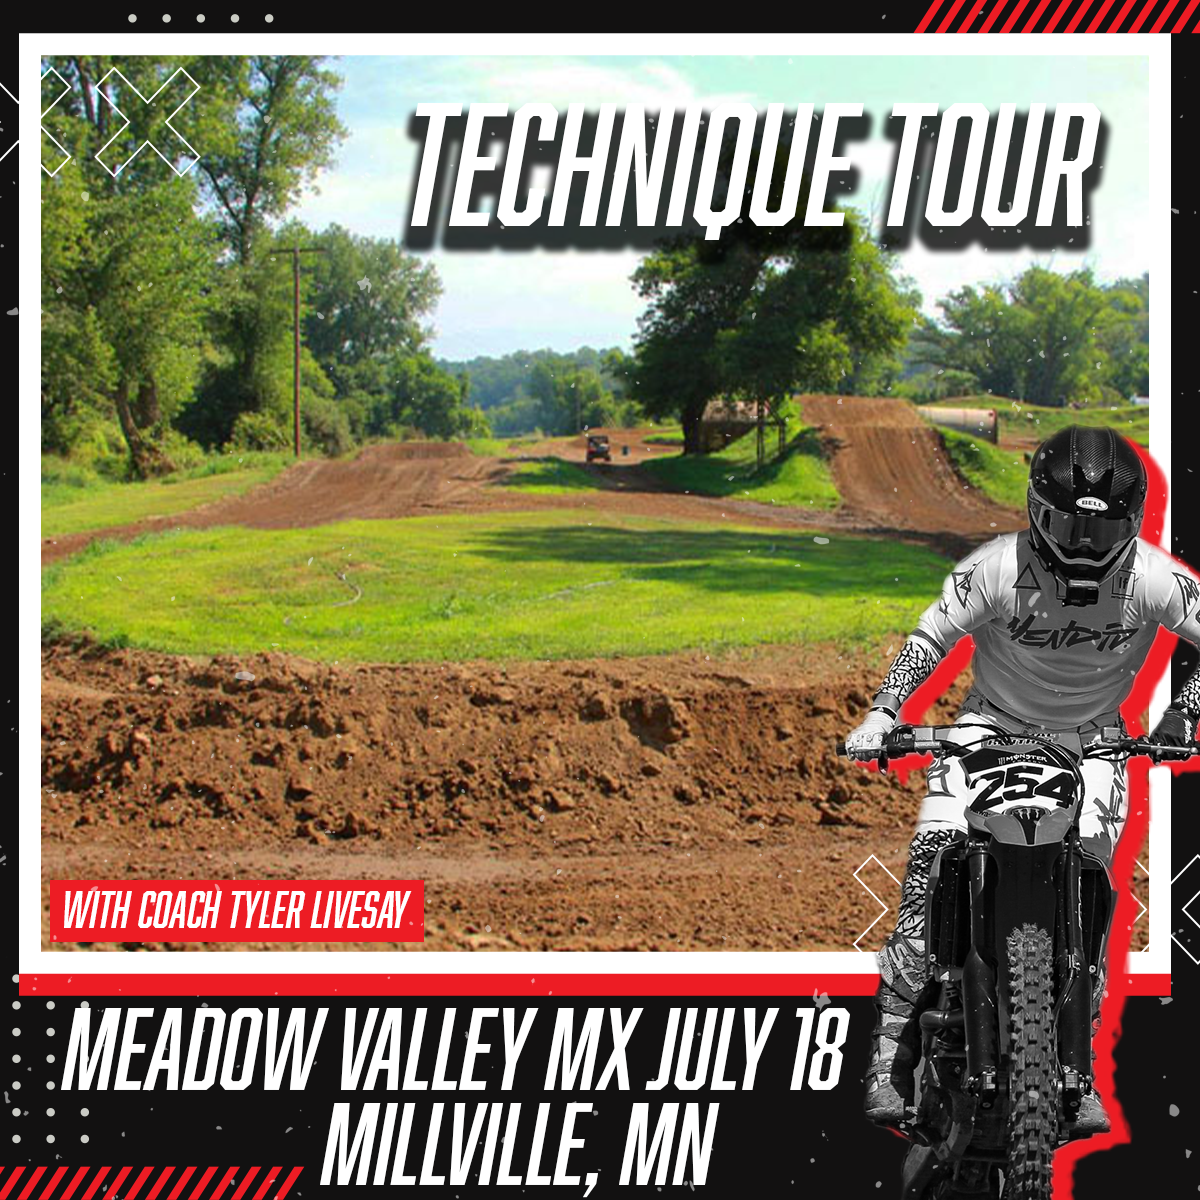 Meadow Valley MX | Millville, MN | July 18